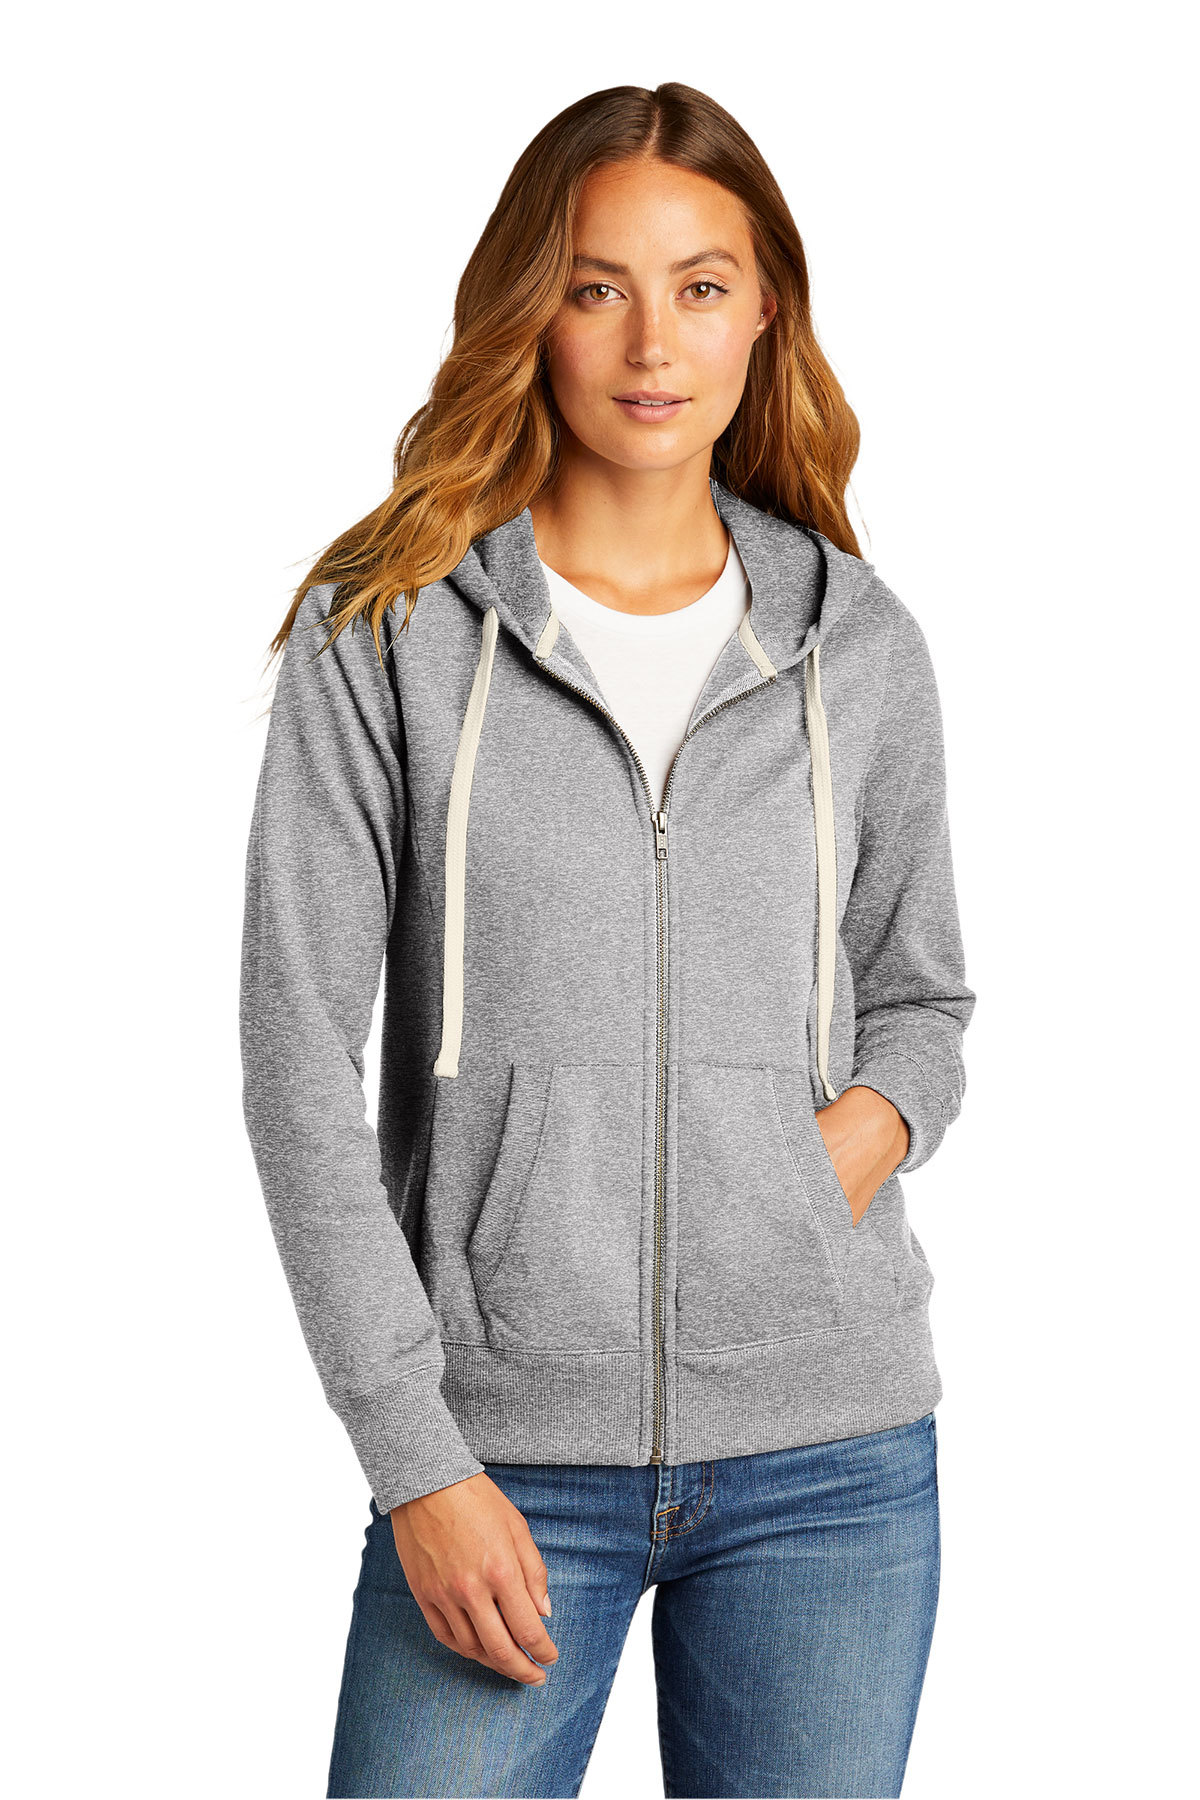 Women’s zip hoodie – How to Style It With Great-Looking Outfits